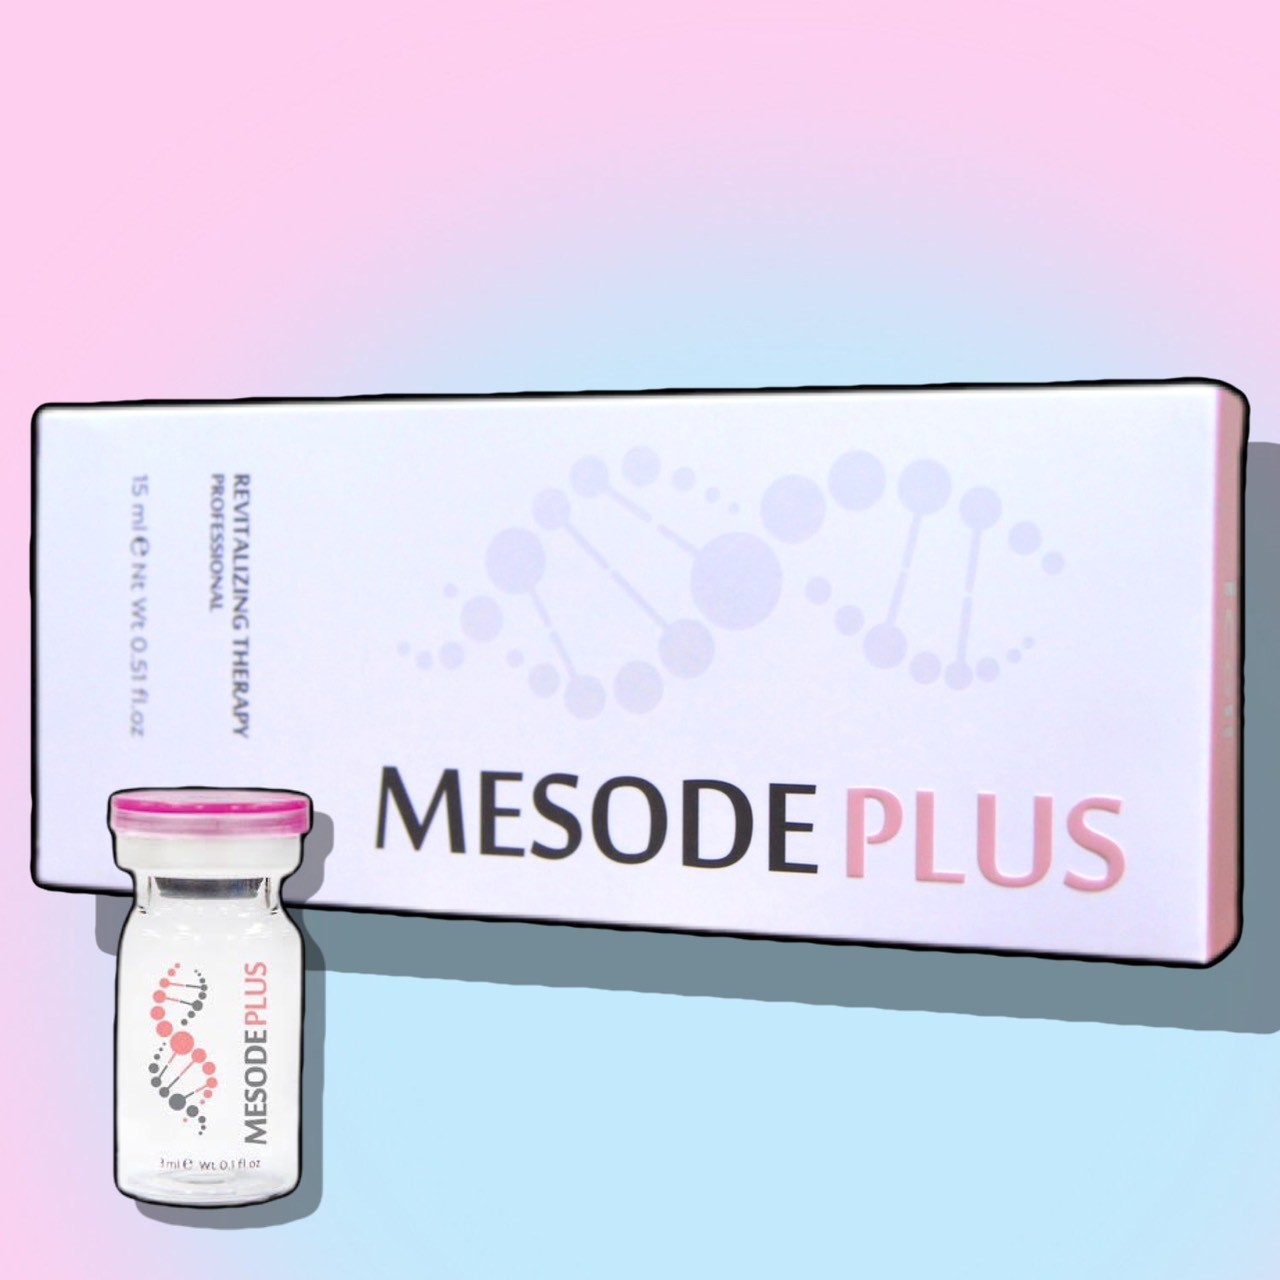 MESODE PLUS ICELL RESTORE MIRACLE SUPER ACTIVE WHITENING AURA www.ccthaitown.com